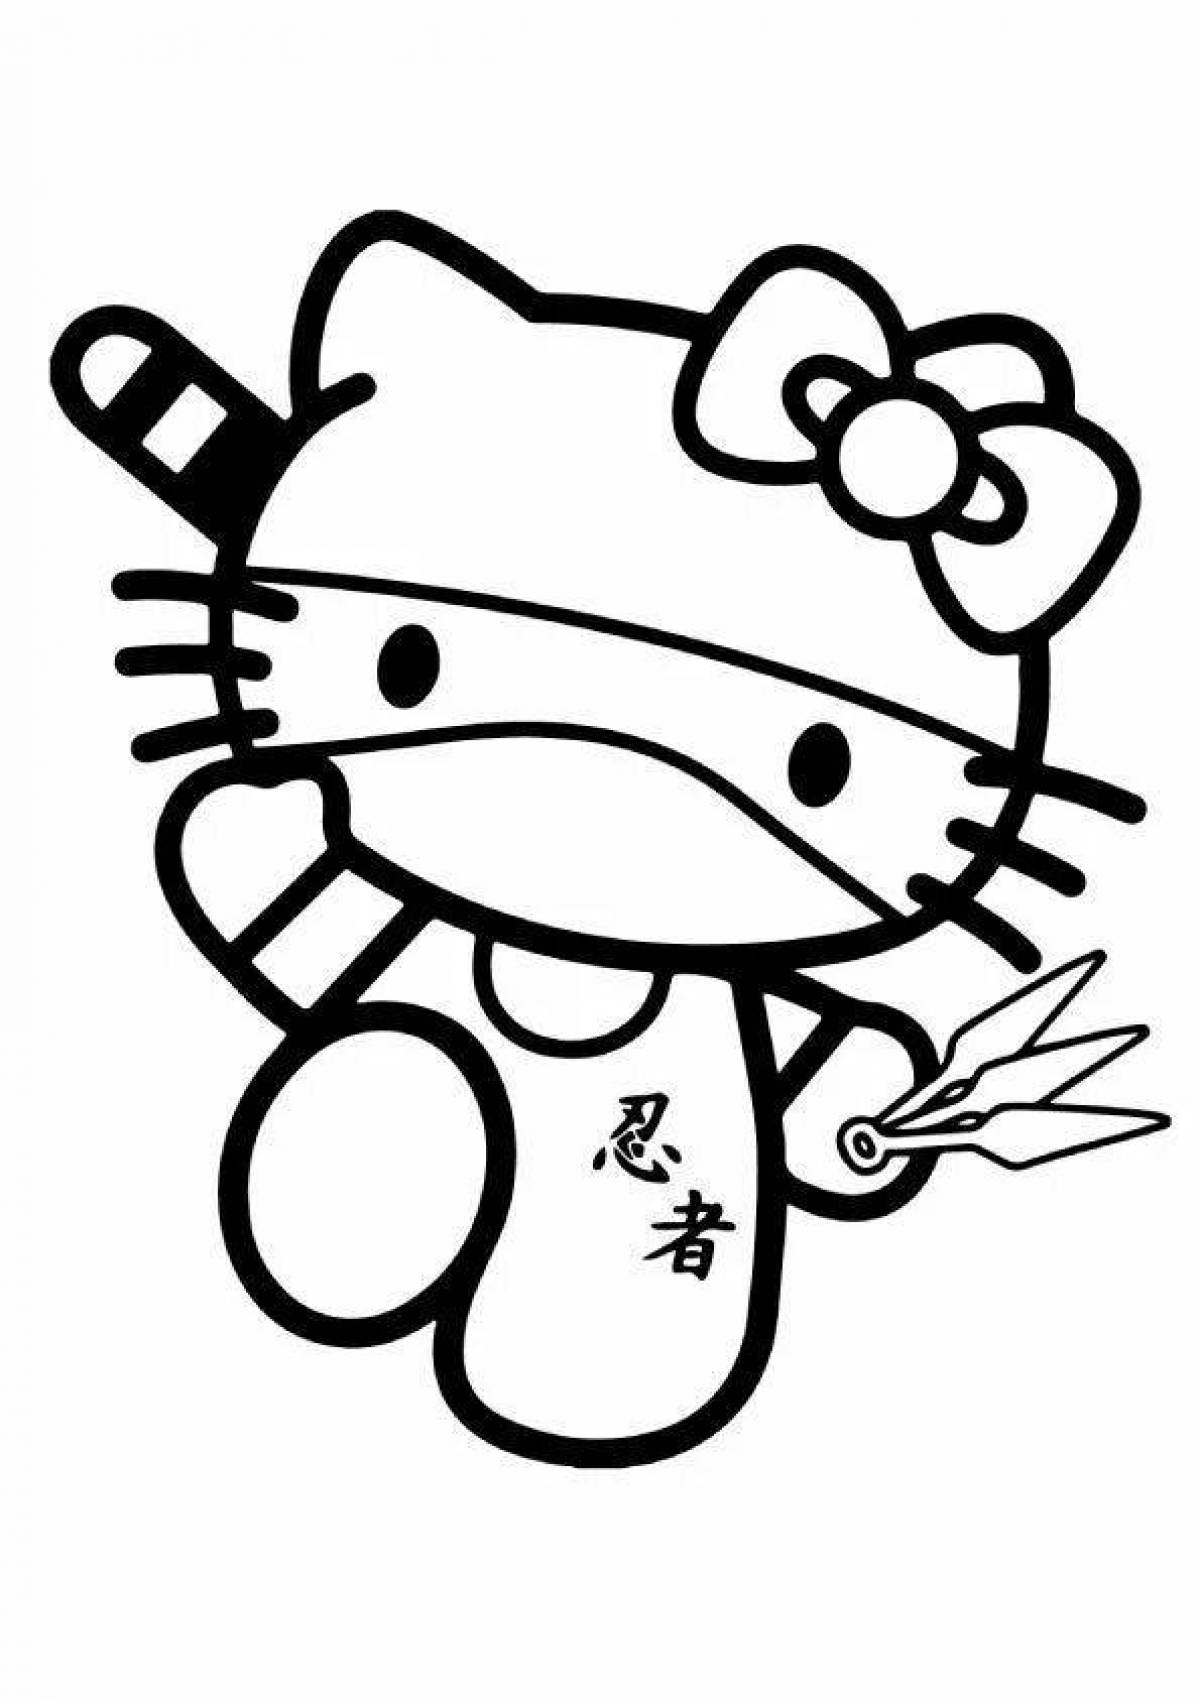 Exquisite hello kitty coloring book in black and white